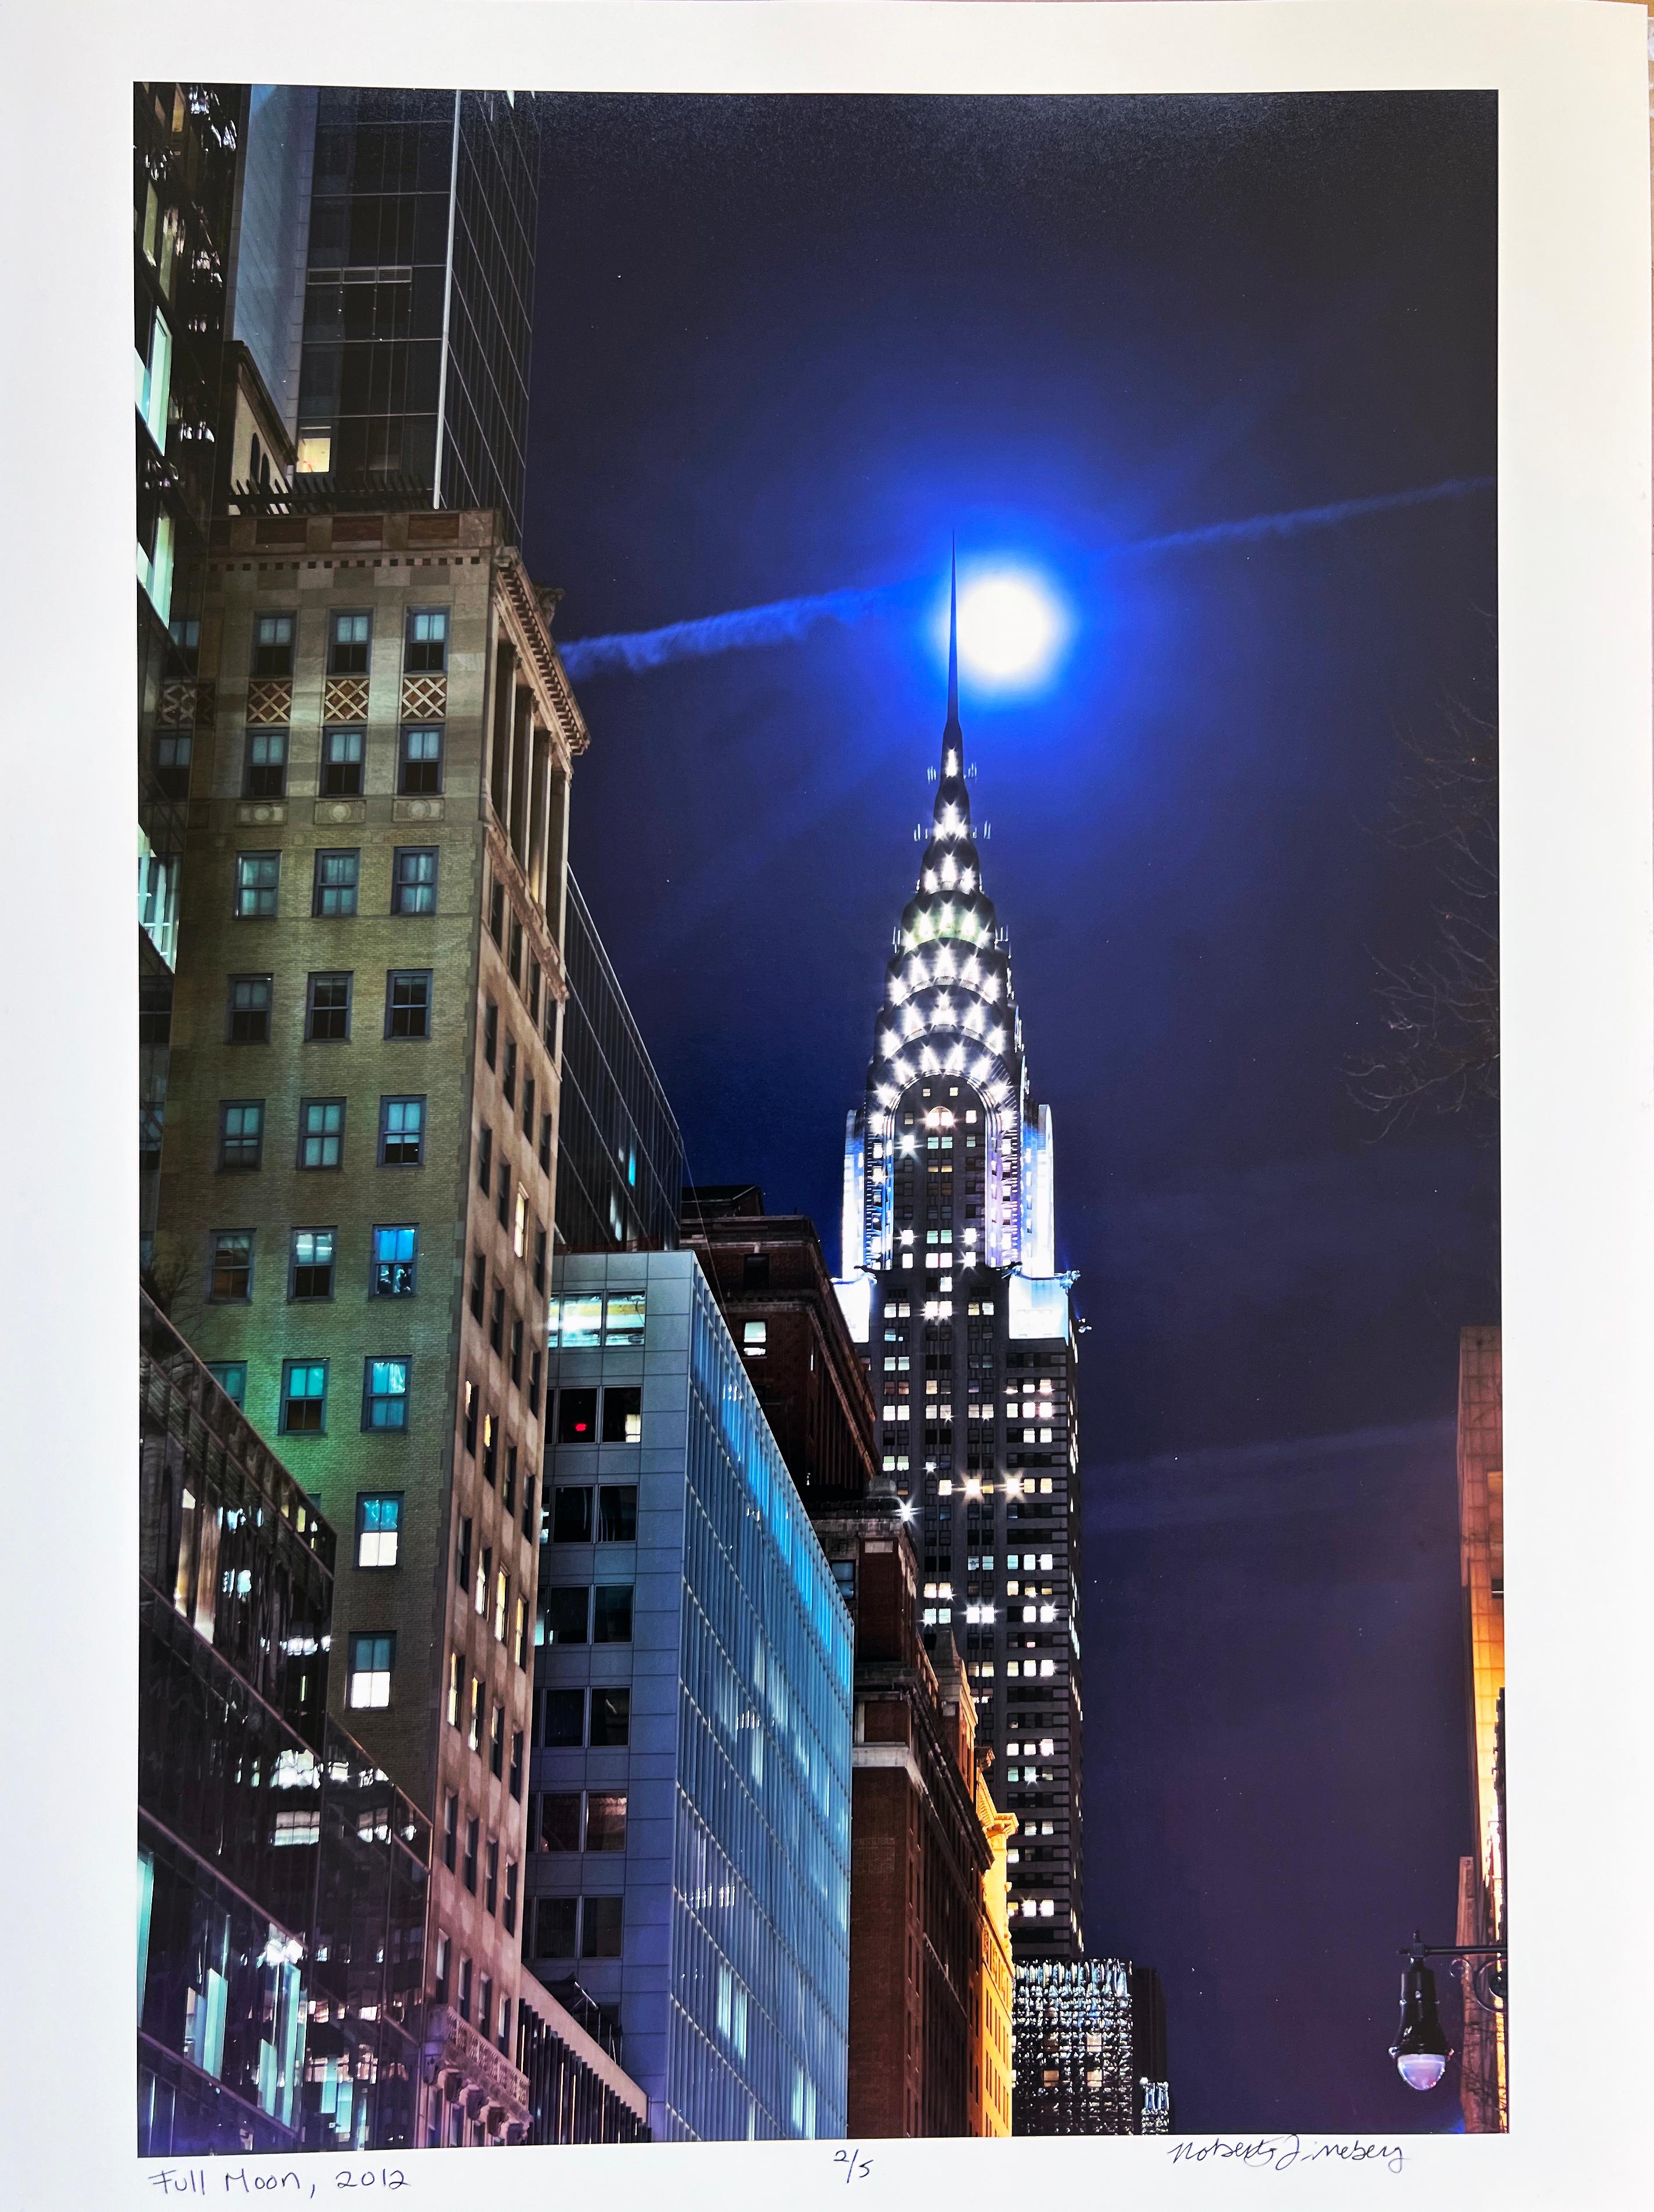 Full Moon, Chrysler Building, New York City, 2012 by Roberta Fineberg is a 24